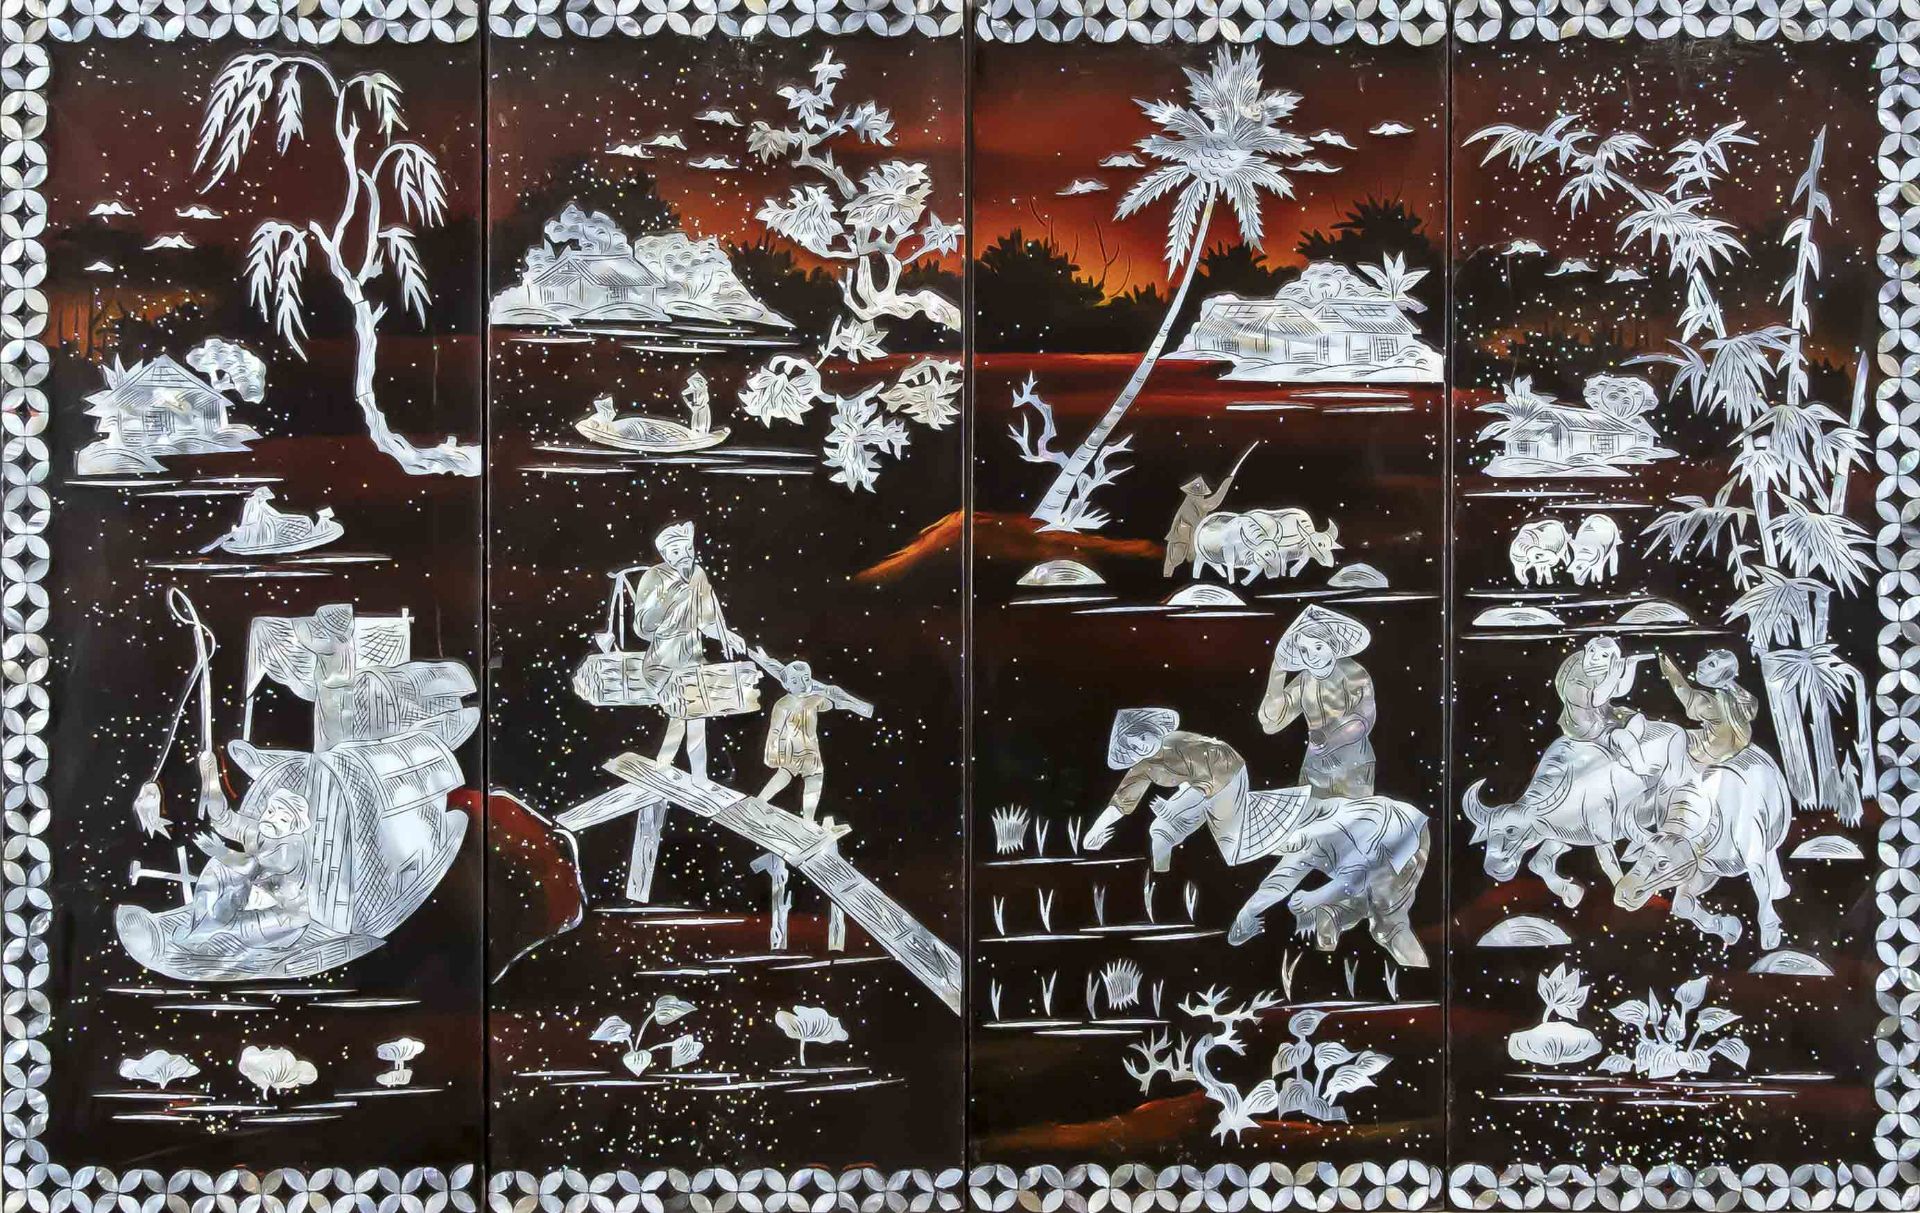 Lacquer painting with mother-of-pearl inlays, China, 20th century, river landscape with fishermen,